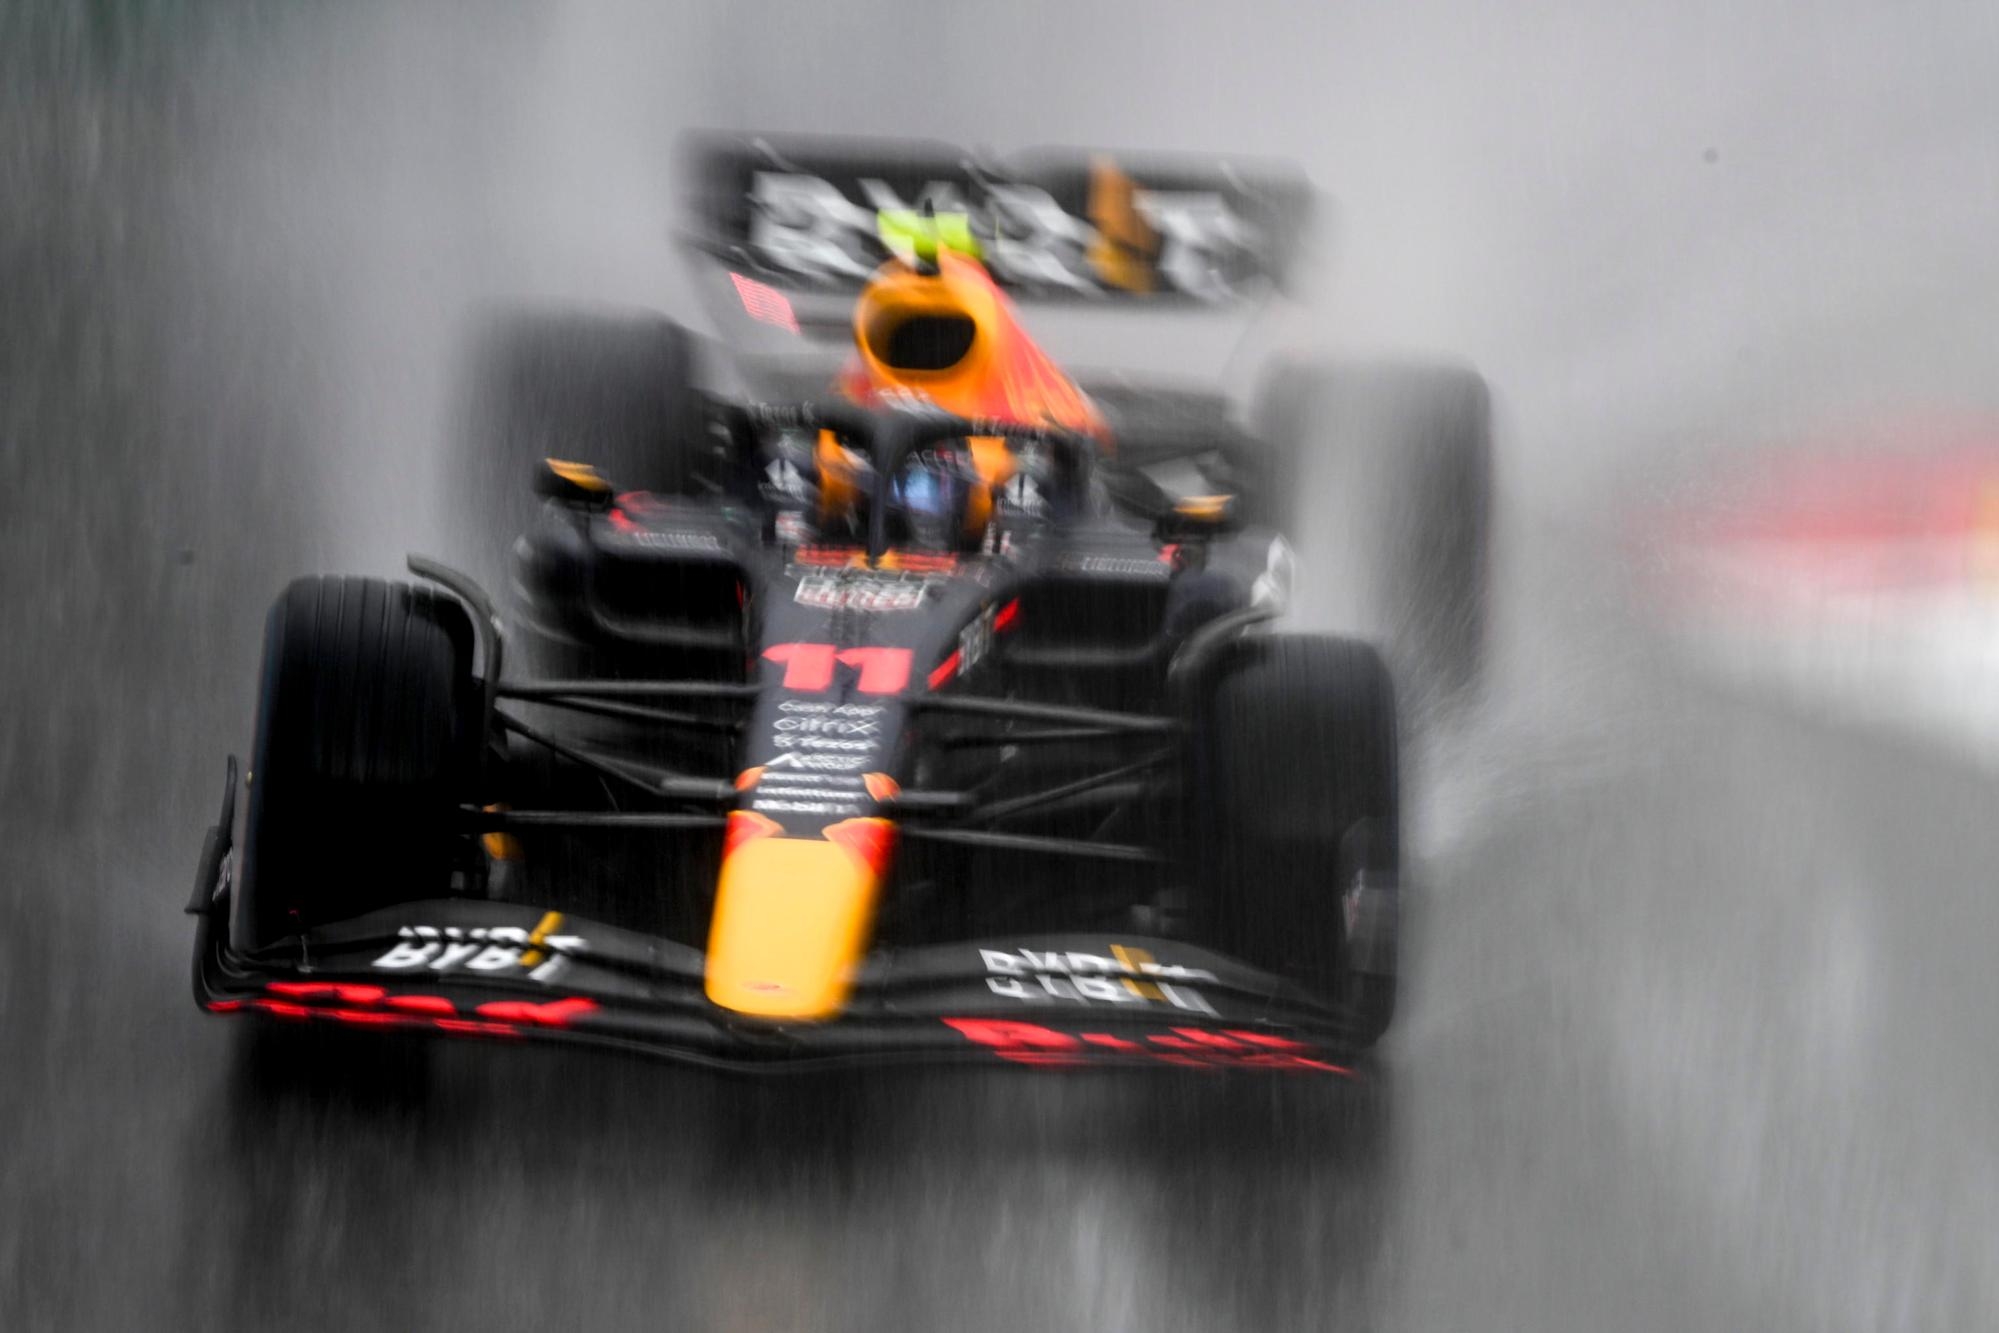 epa09984280 Mexican Formula One driver Sergio Perez of Red Bull Racing in action in the pouring rain during a formation lap for the start of the Formula One Grand Prix of Monaco at the Circuit de Monaco in Monte Carlo, Monaco, 29 May 2022. EPA/CHRISTIAN BRUNA